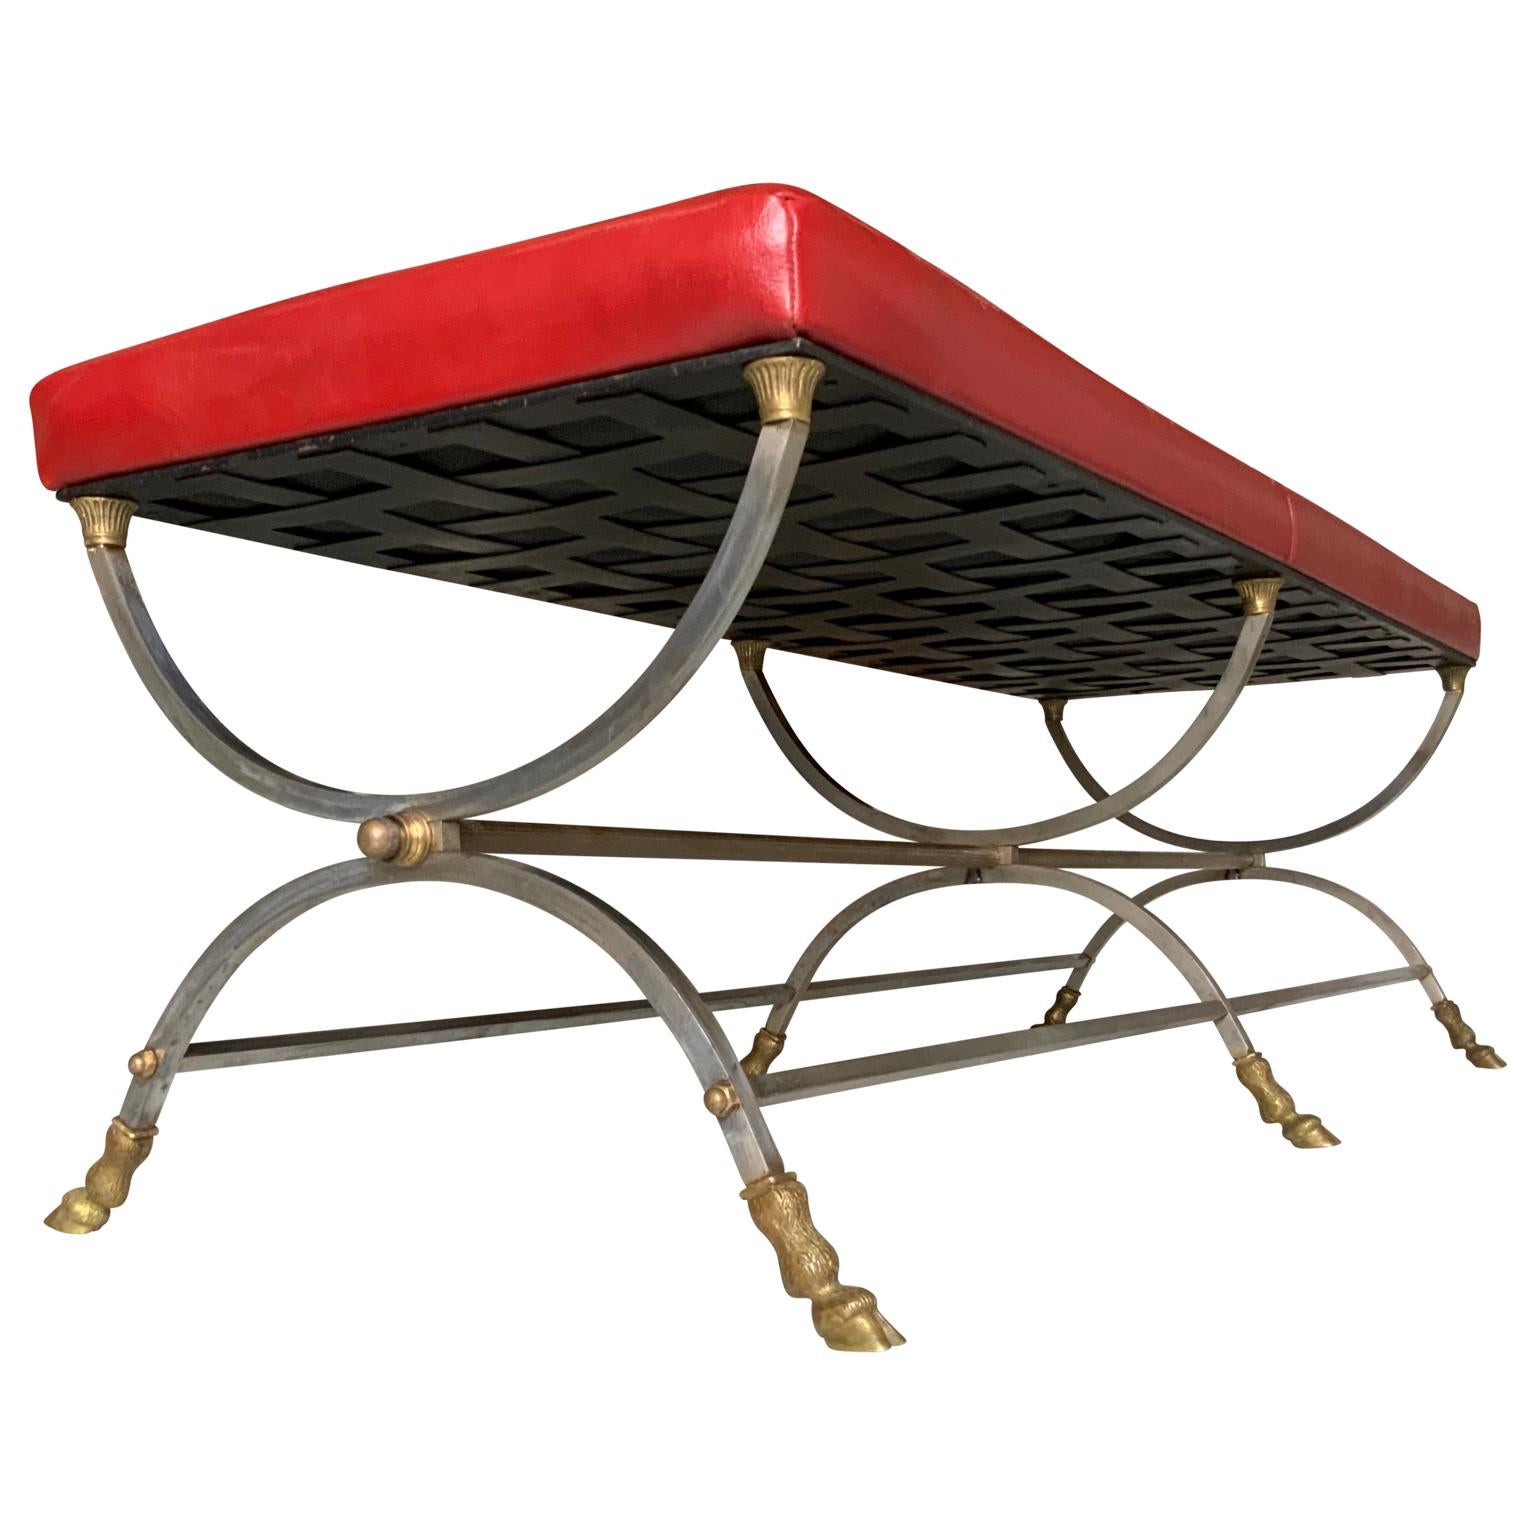 20th Century Maison Jansen Neoclassical Bronze and Steel Bench in Red Leather Upholstery